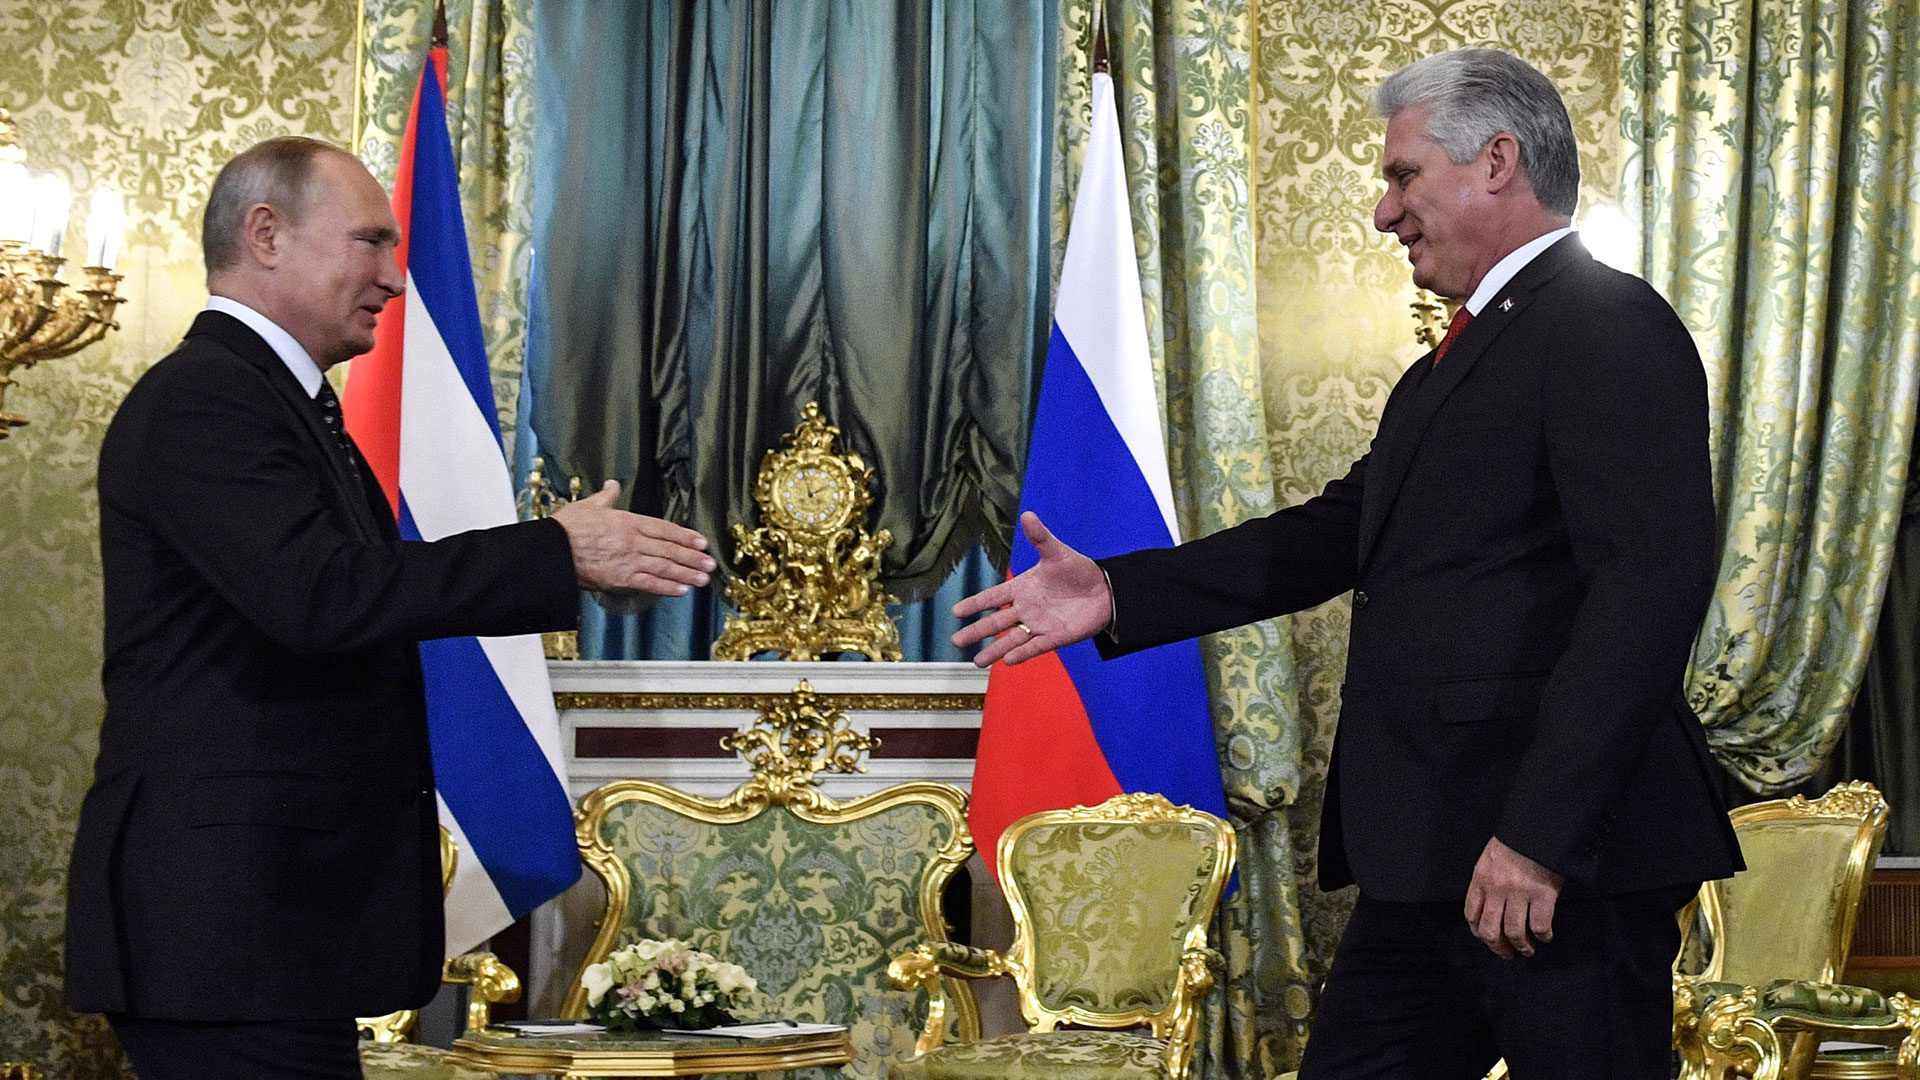 File photo: Putin greets Diaz-Canel upon his arrival in the Kremlin in 2018 (AFP)